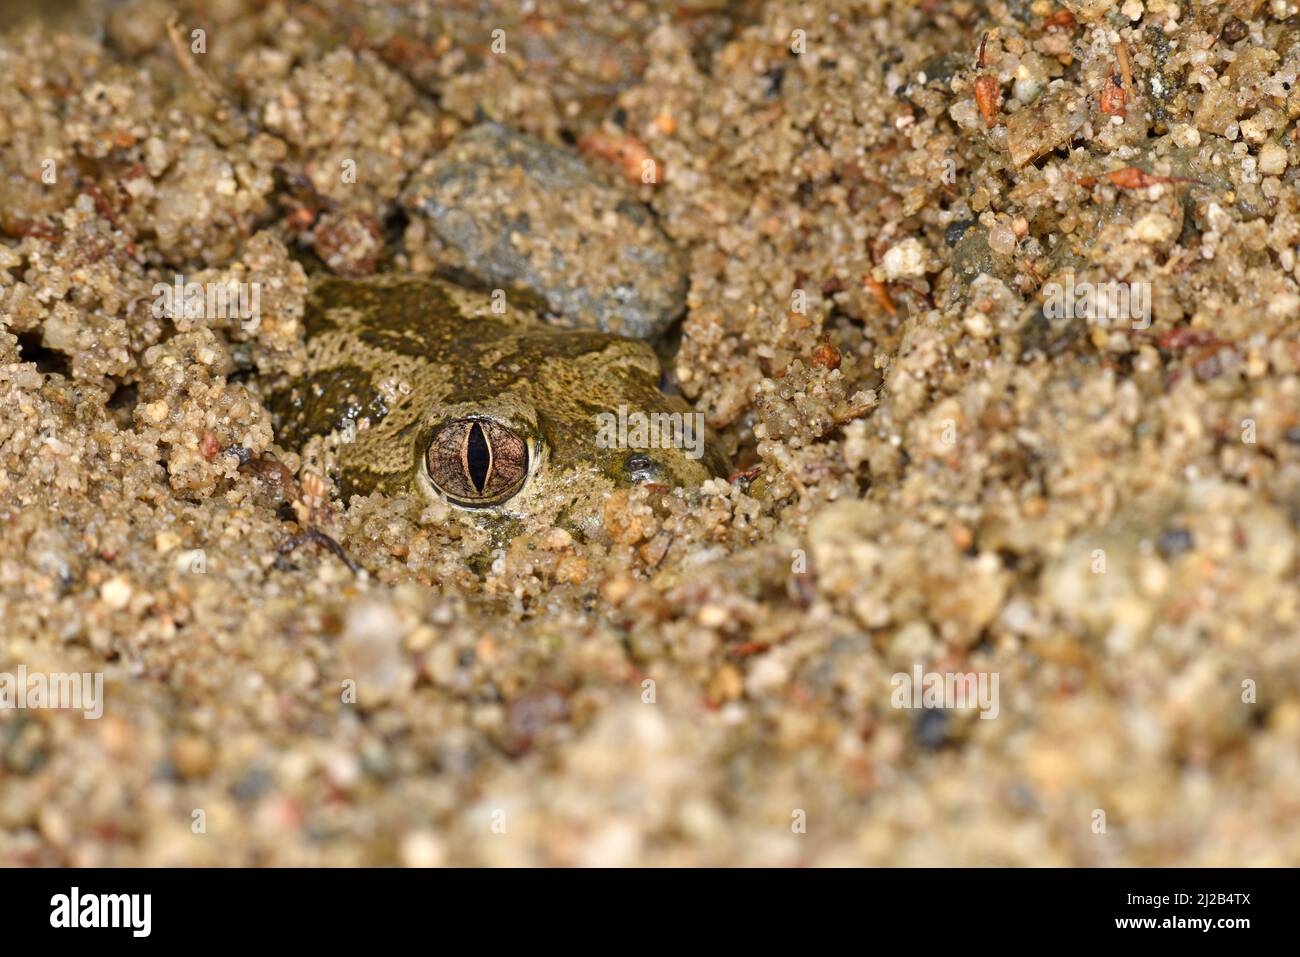 European Common Spadefoot Toad (Pelobates fuscus) hiding in sandy soil with head and eye visible, Bulgaria, April Stock Photo